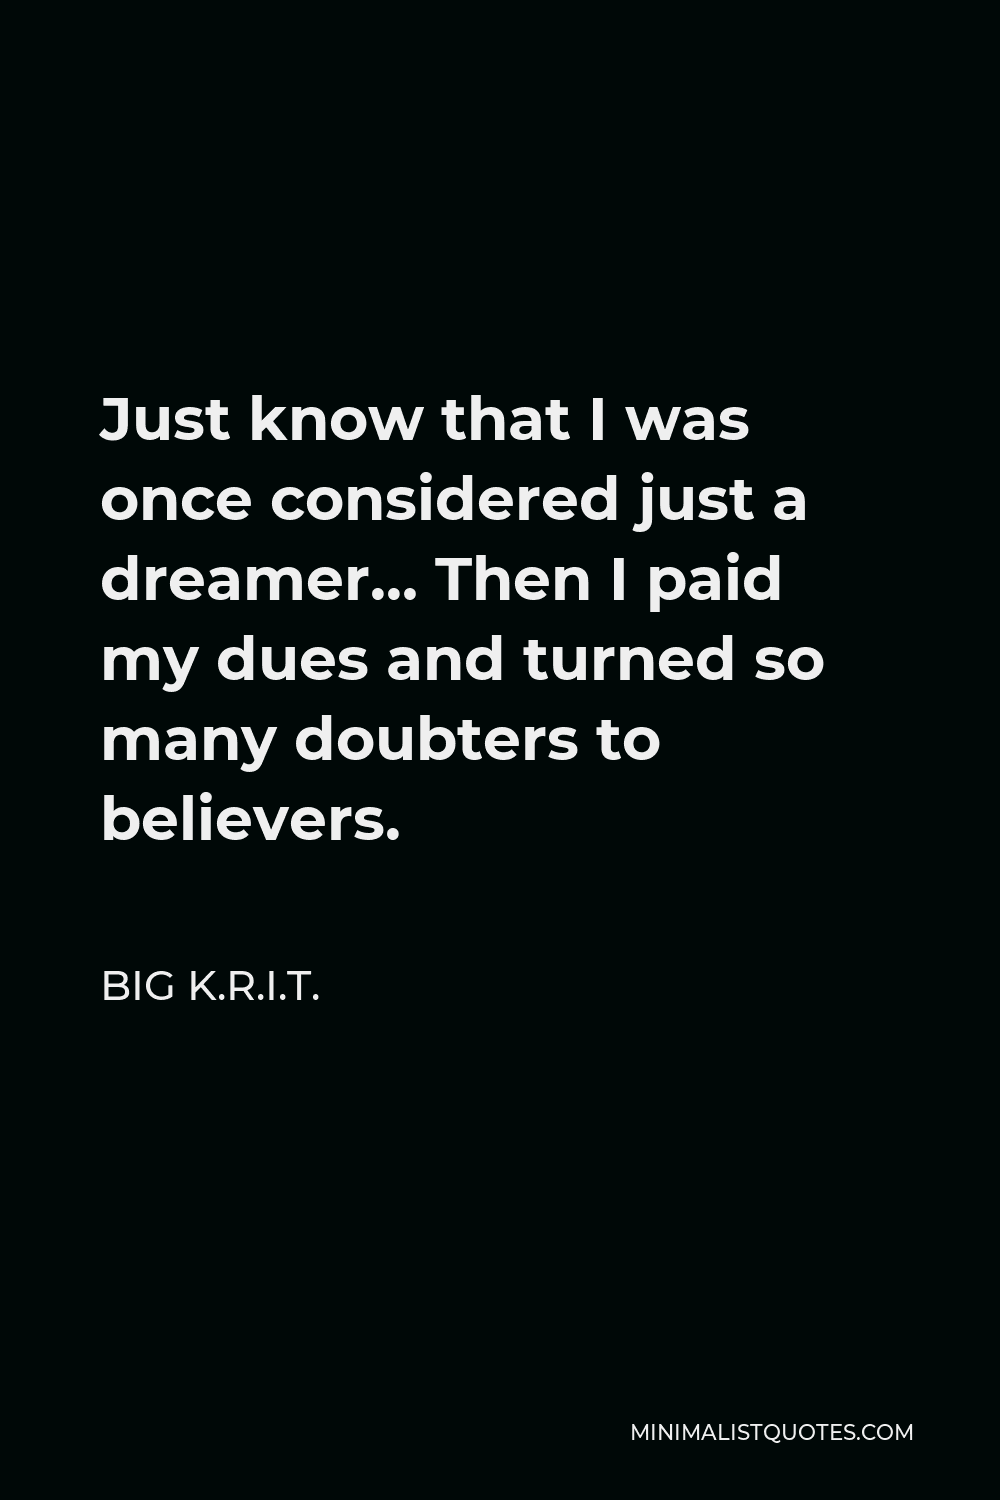 Big K.R.I.T. Quote - Just know that I was once considered just a dreamer… Then I paid my dues and turned so many doubters to believers.